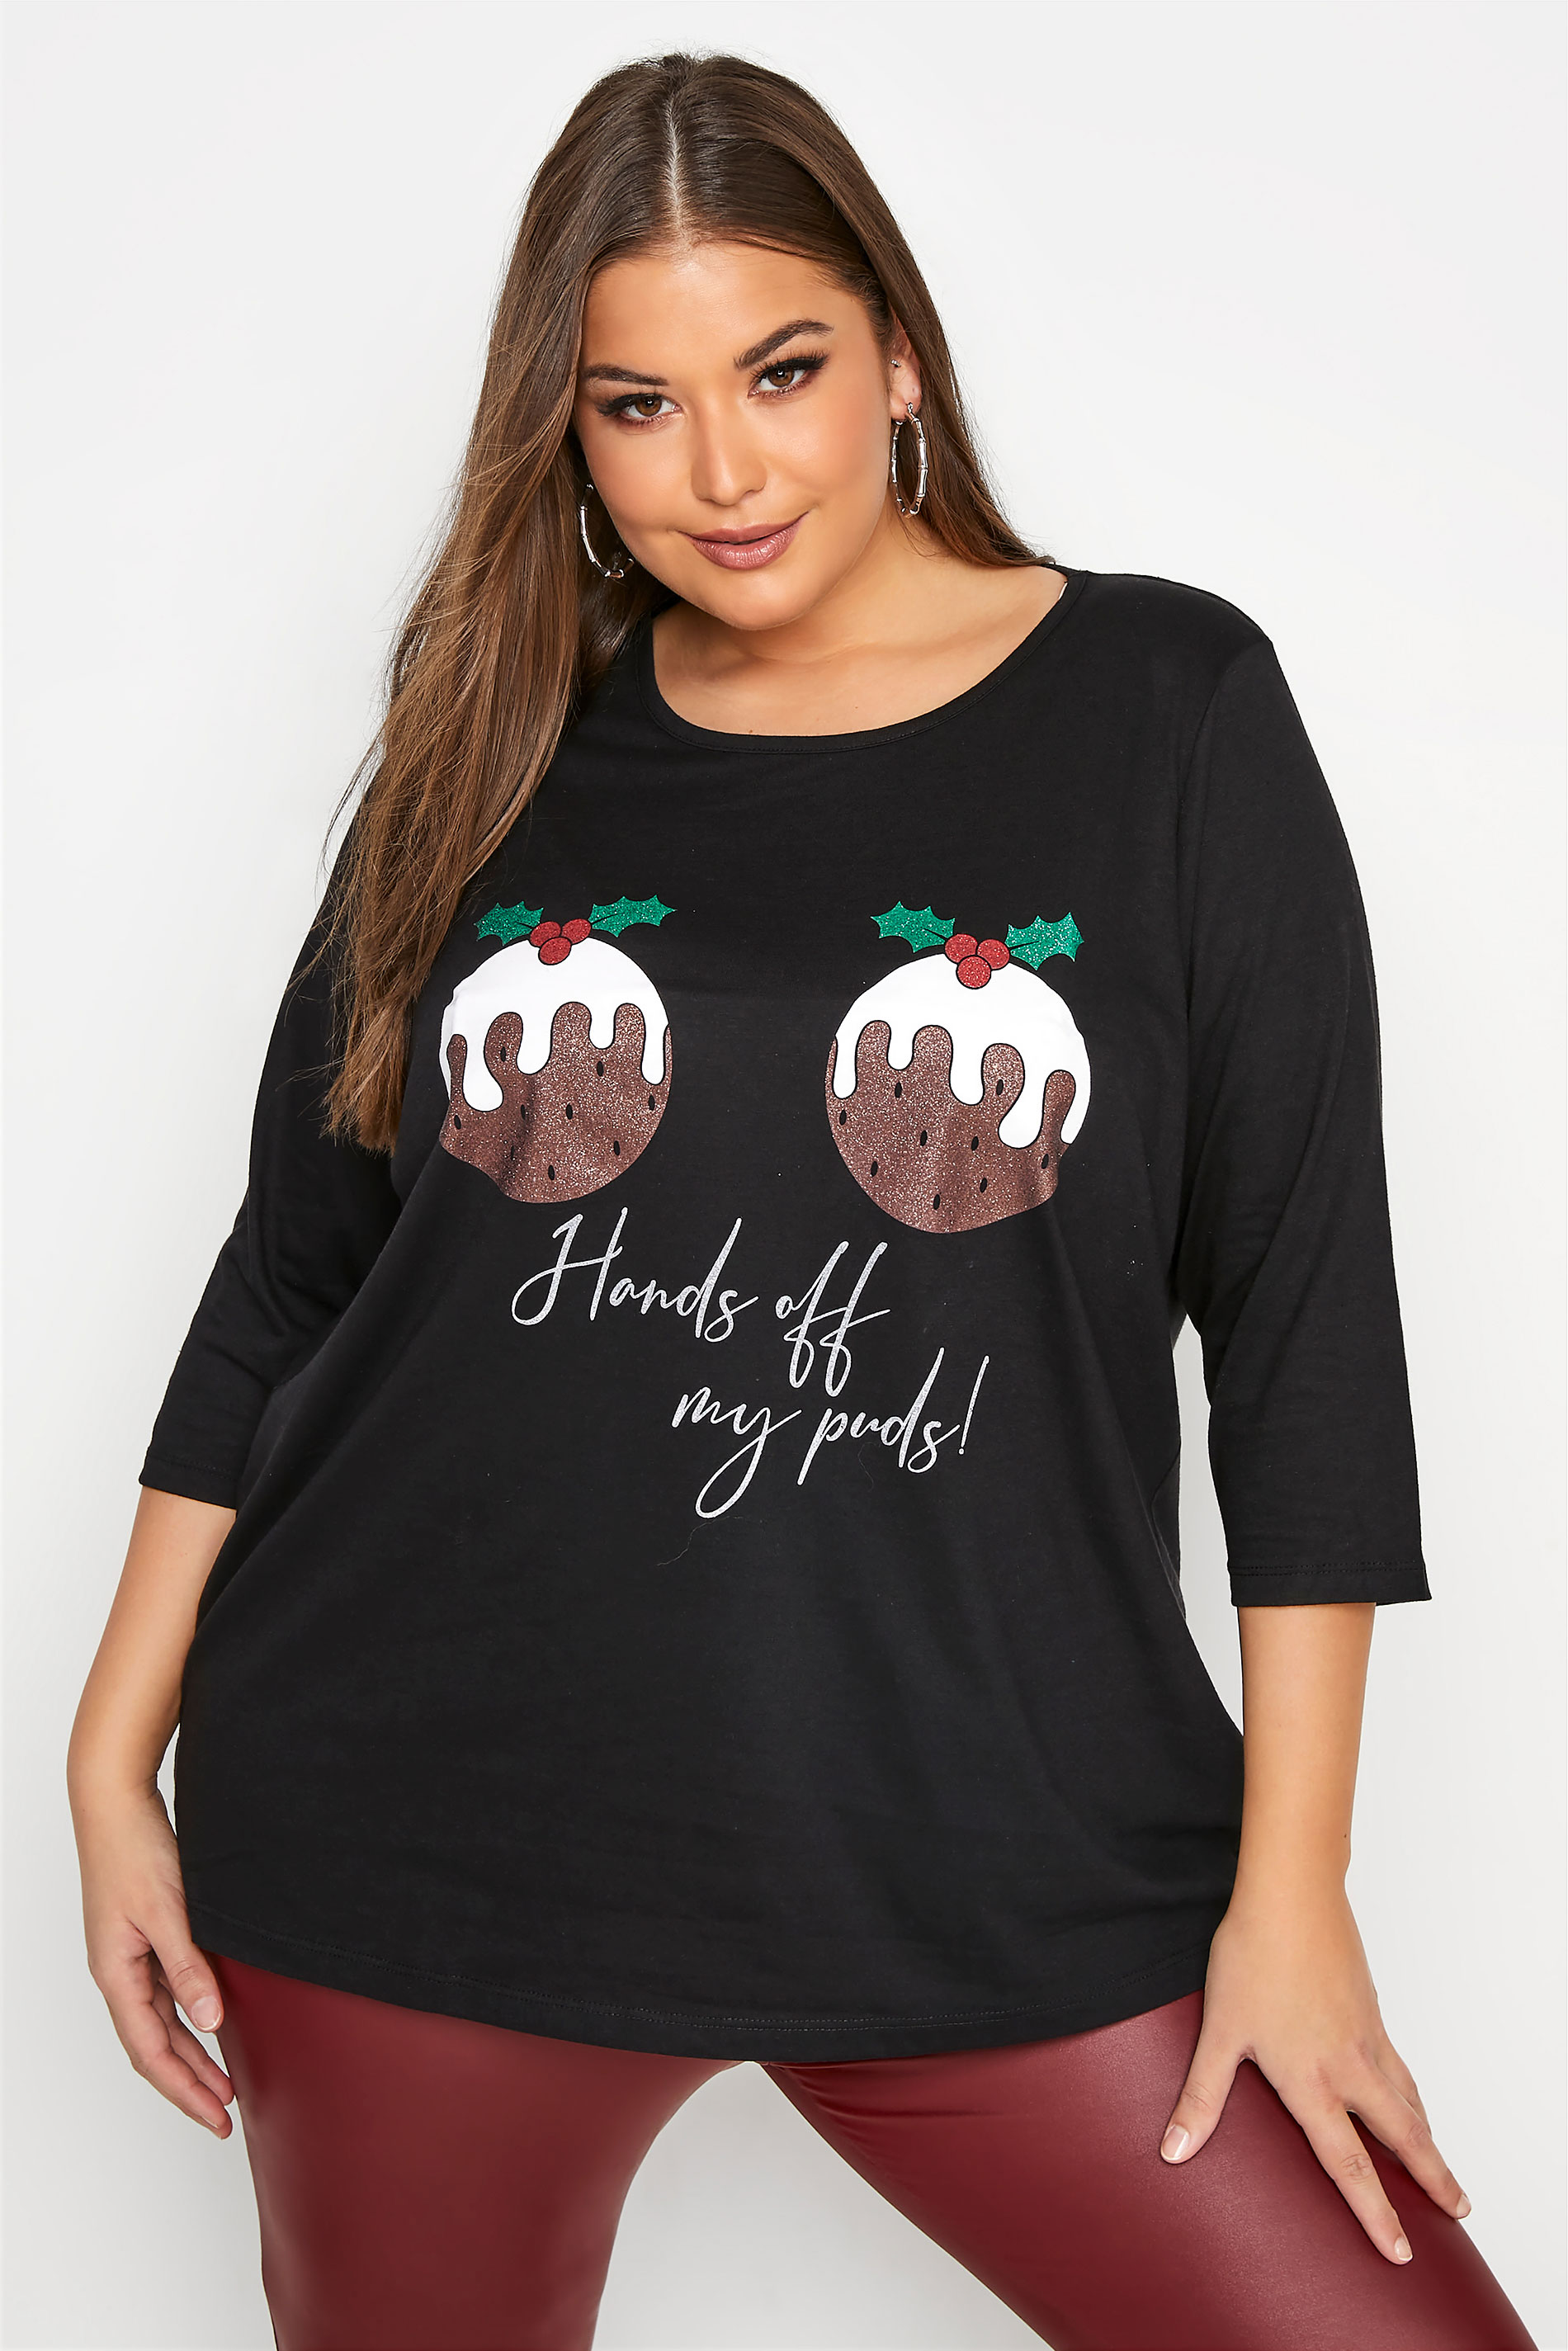 Black Sparkle 'Hands Off My Puds!' Slogan Christmas T-Shirt_A.jpg